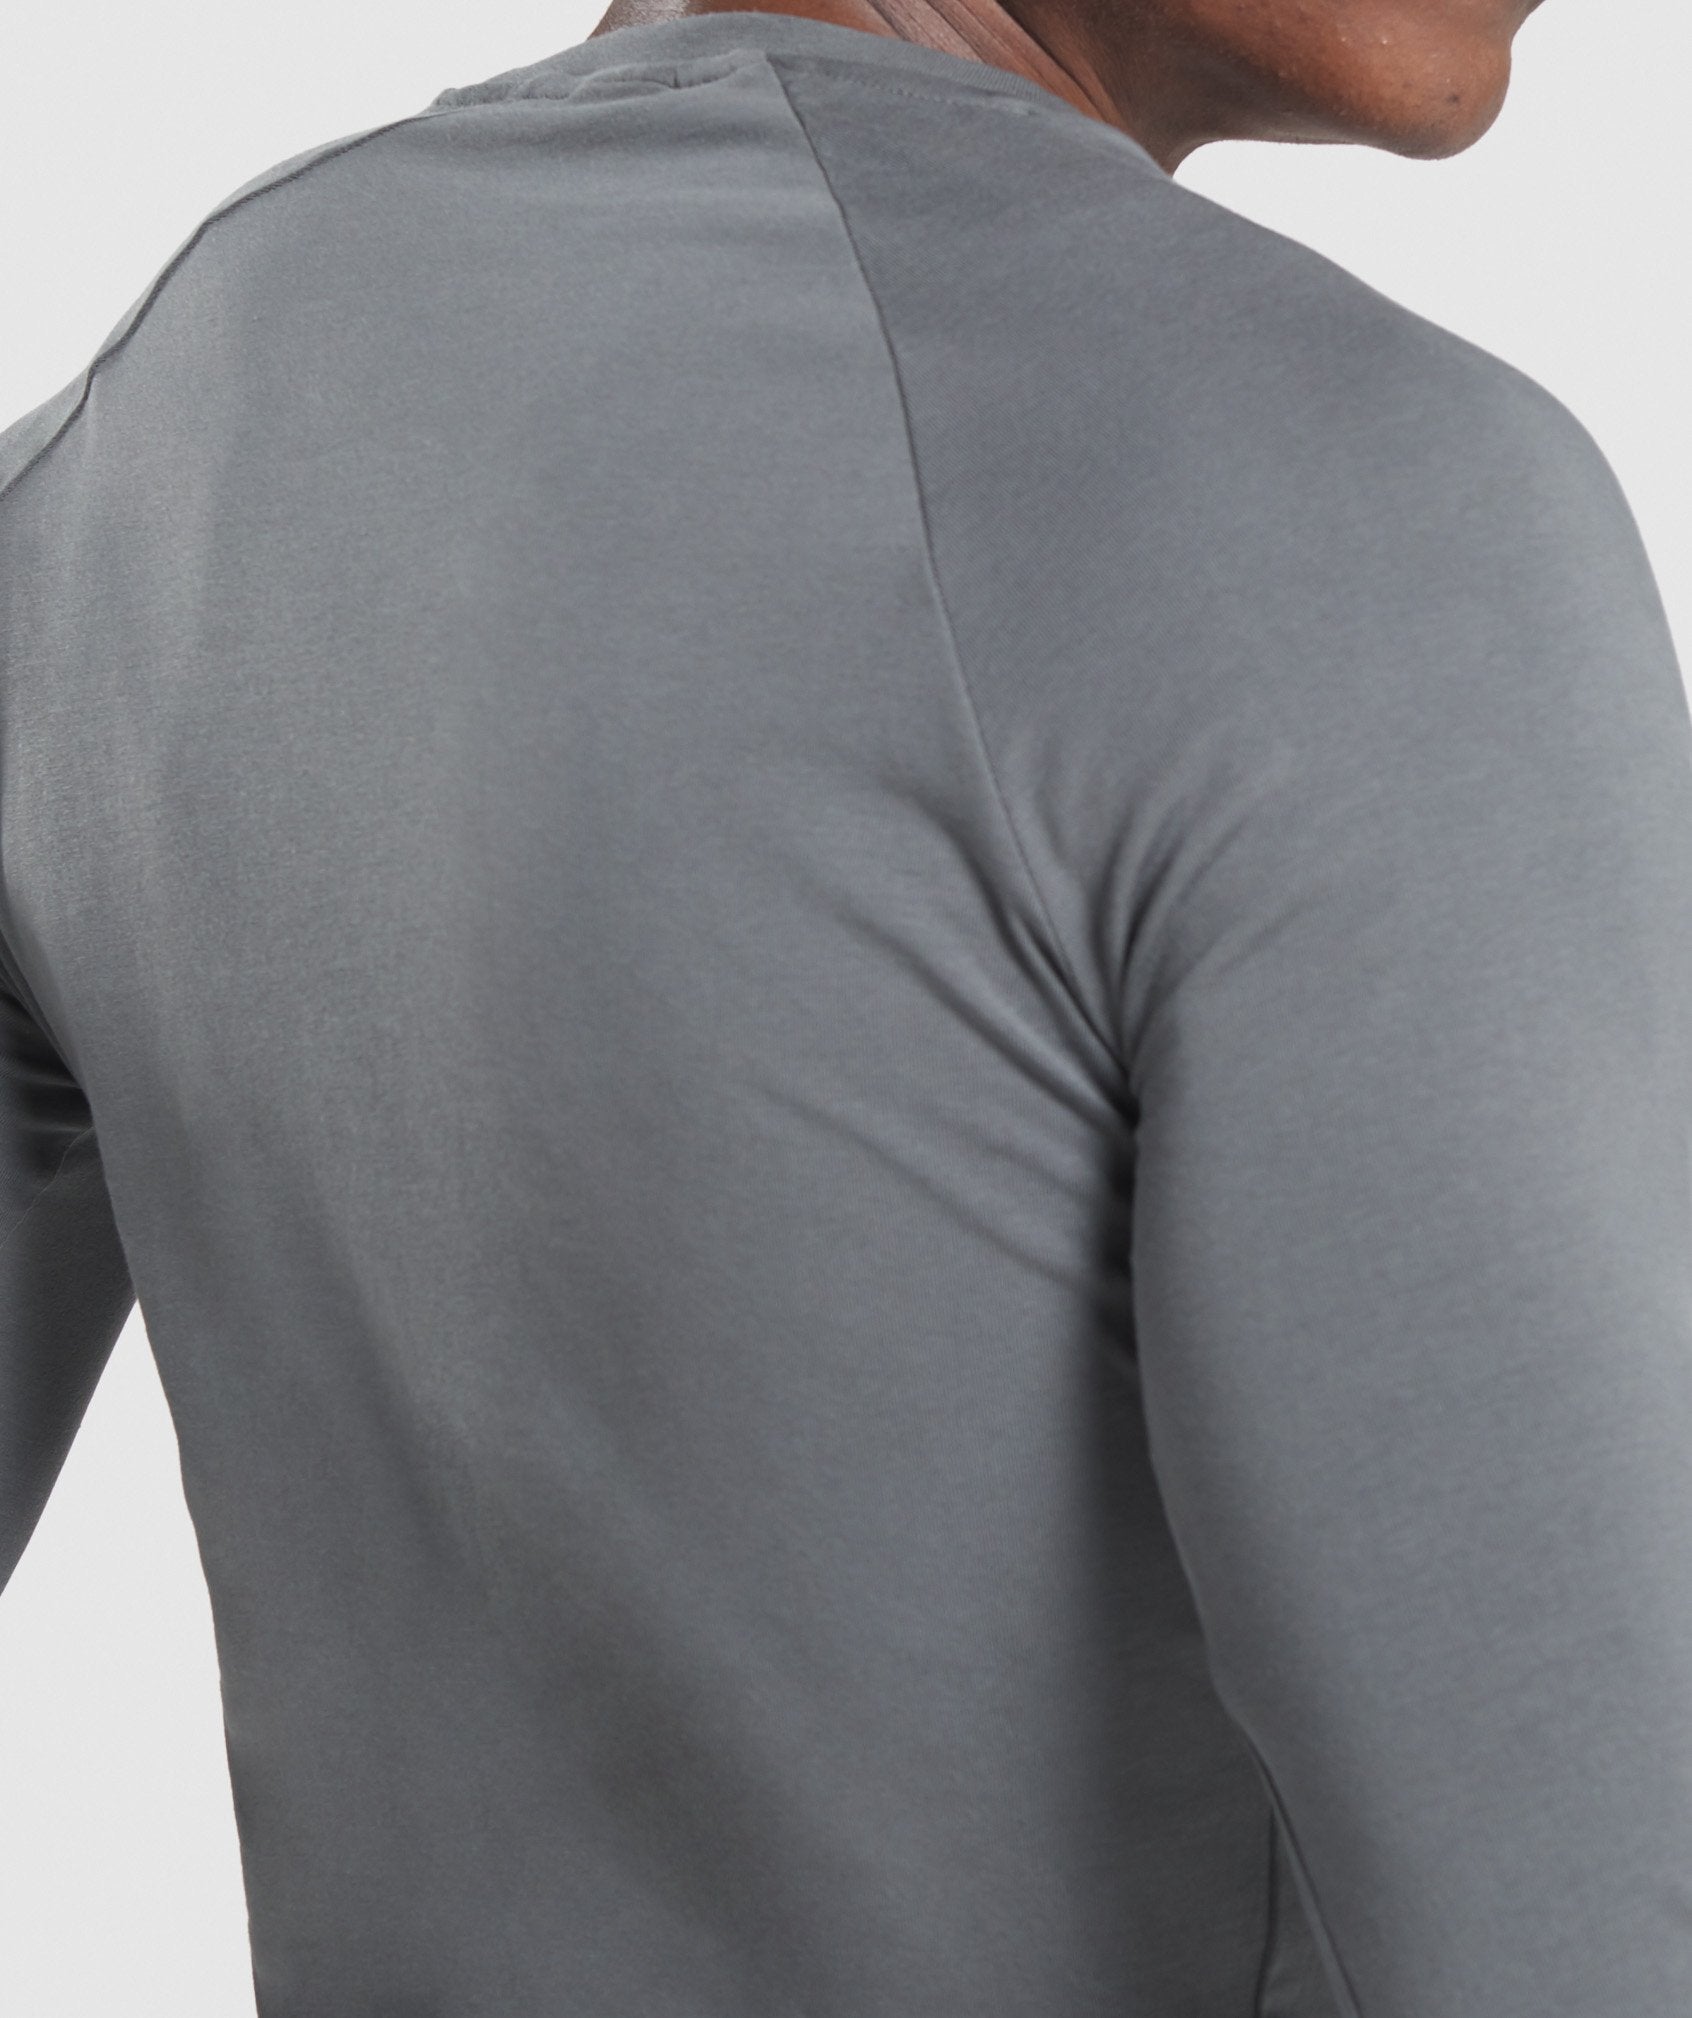 Apollo Long Sleeve T-Shirt in Charcoal